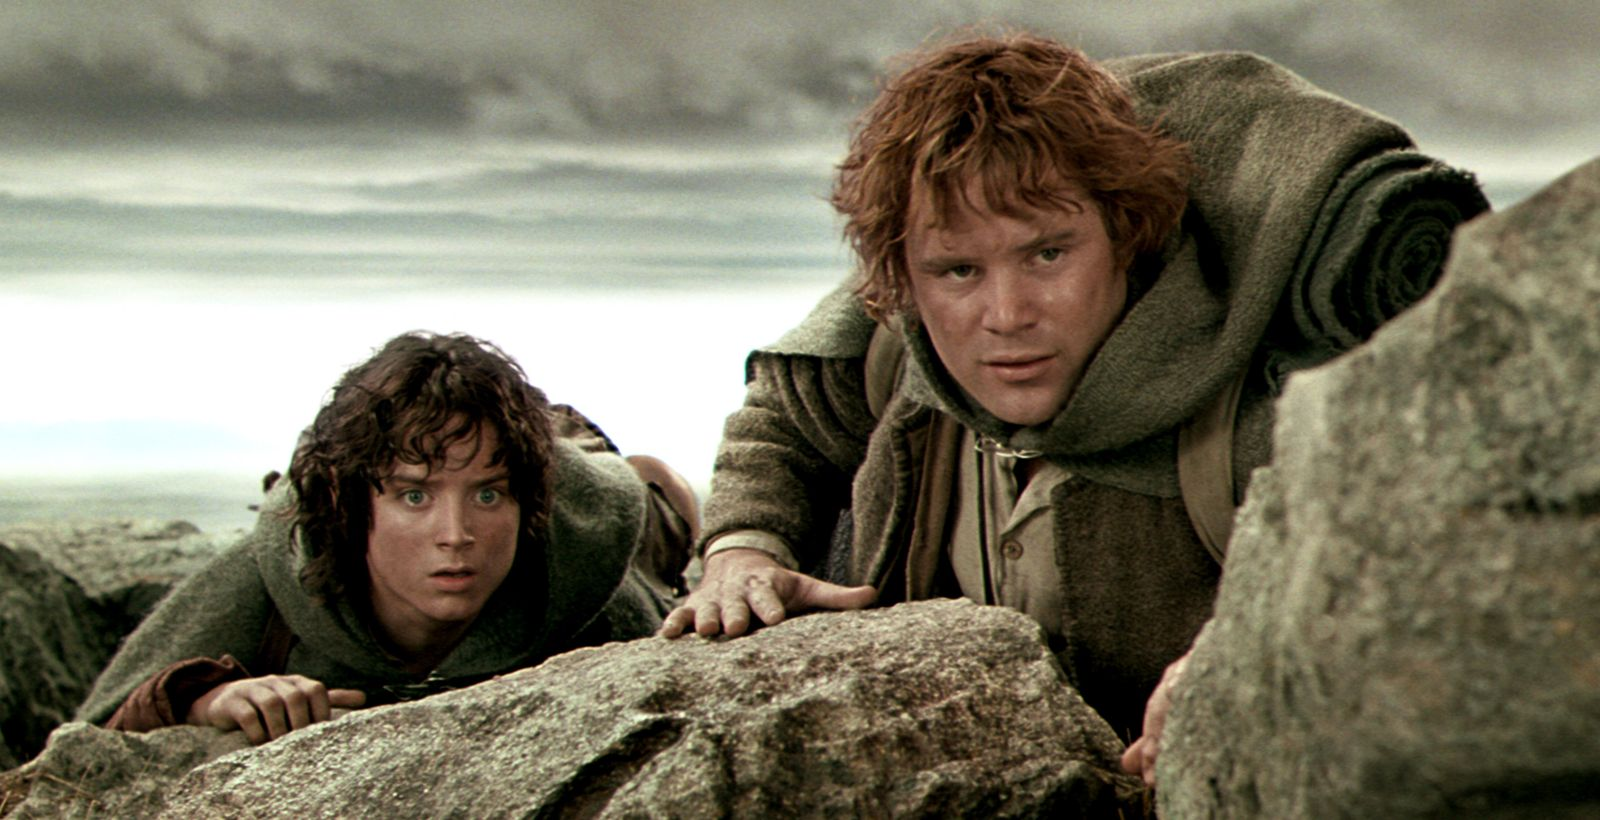 Elijah Wood and Sean Astin as Frodo and Samwise, The Lord of the Rings: The Two Towers (2002)